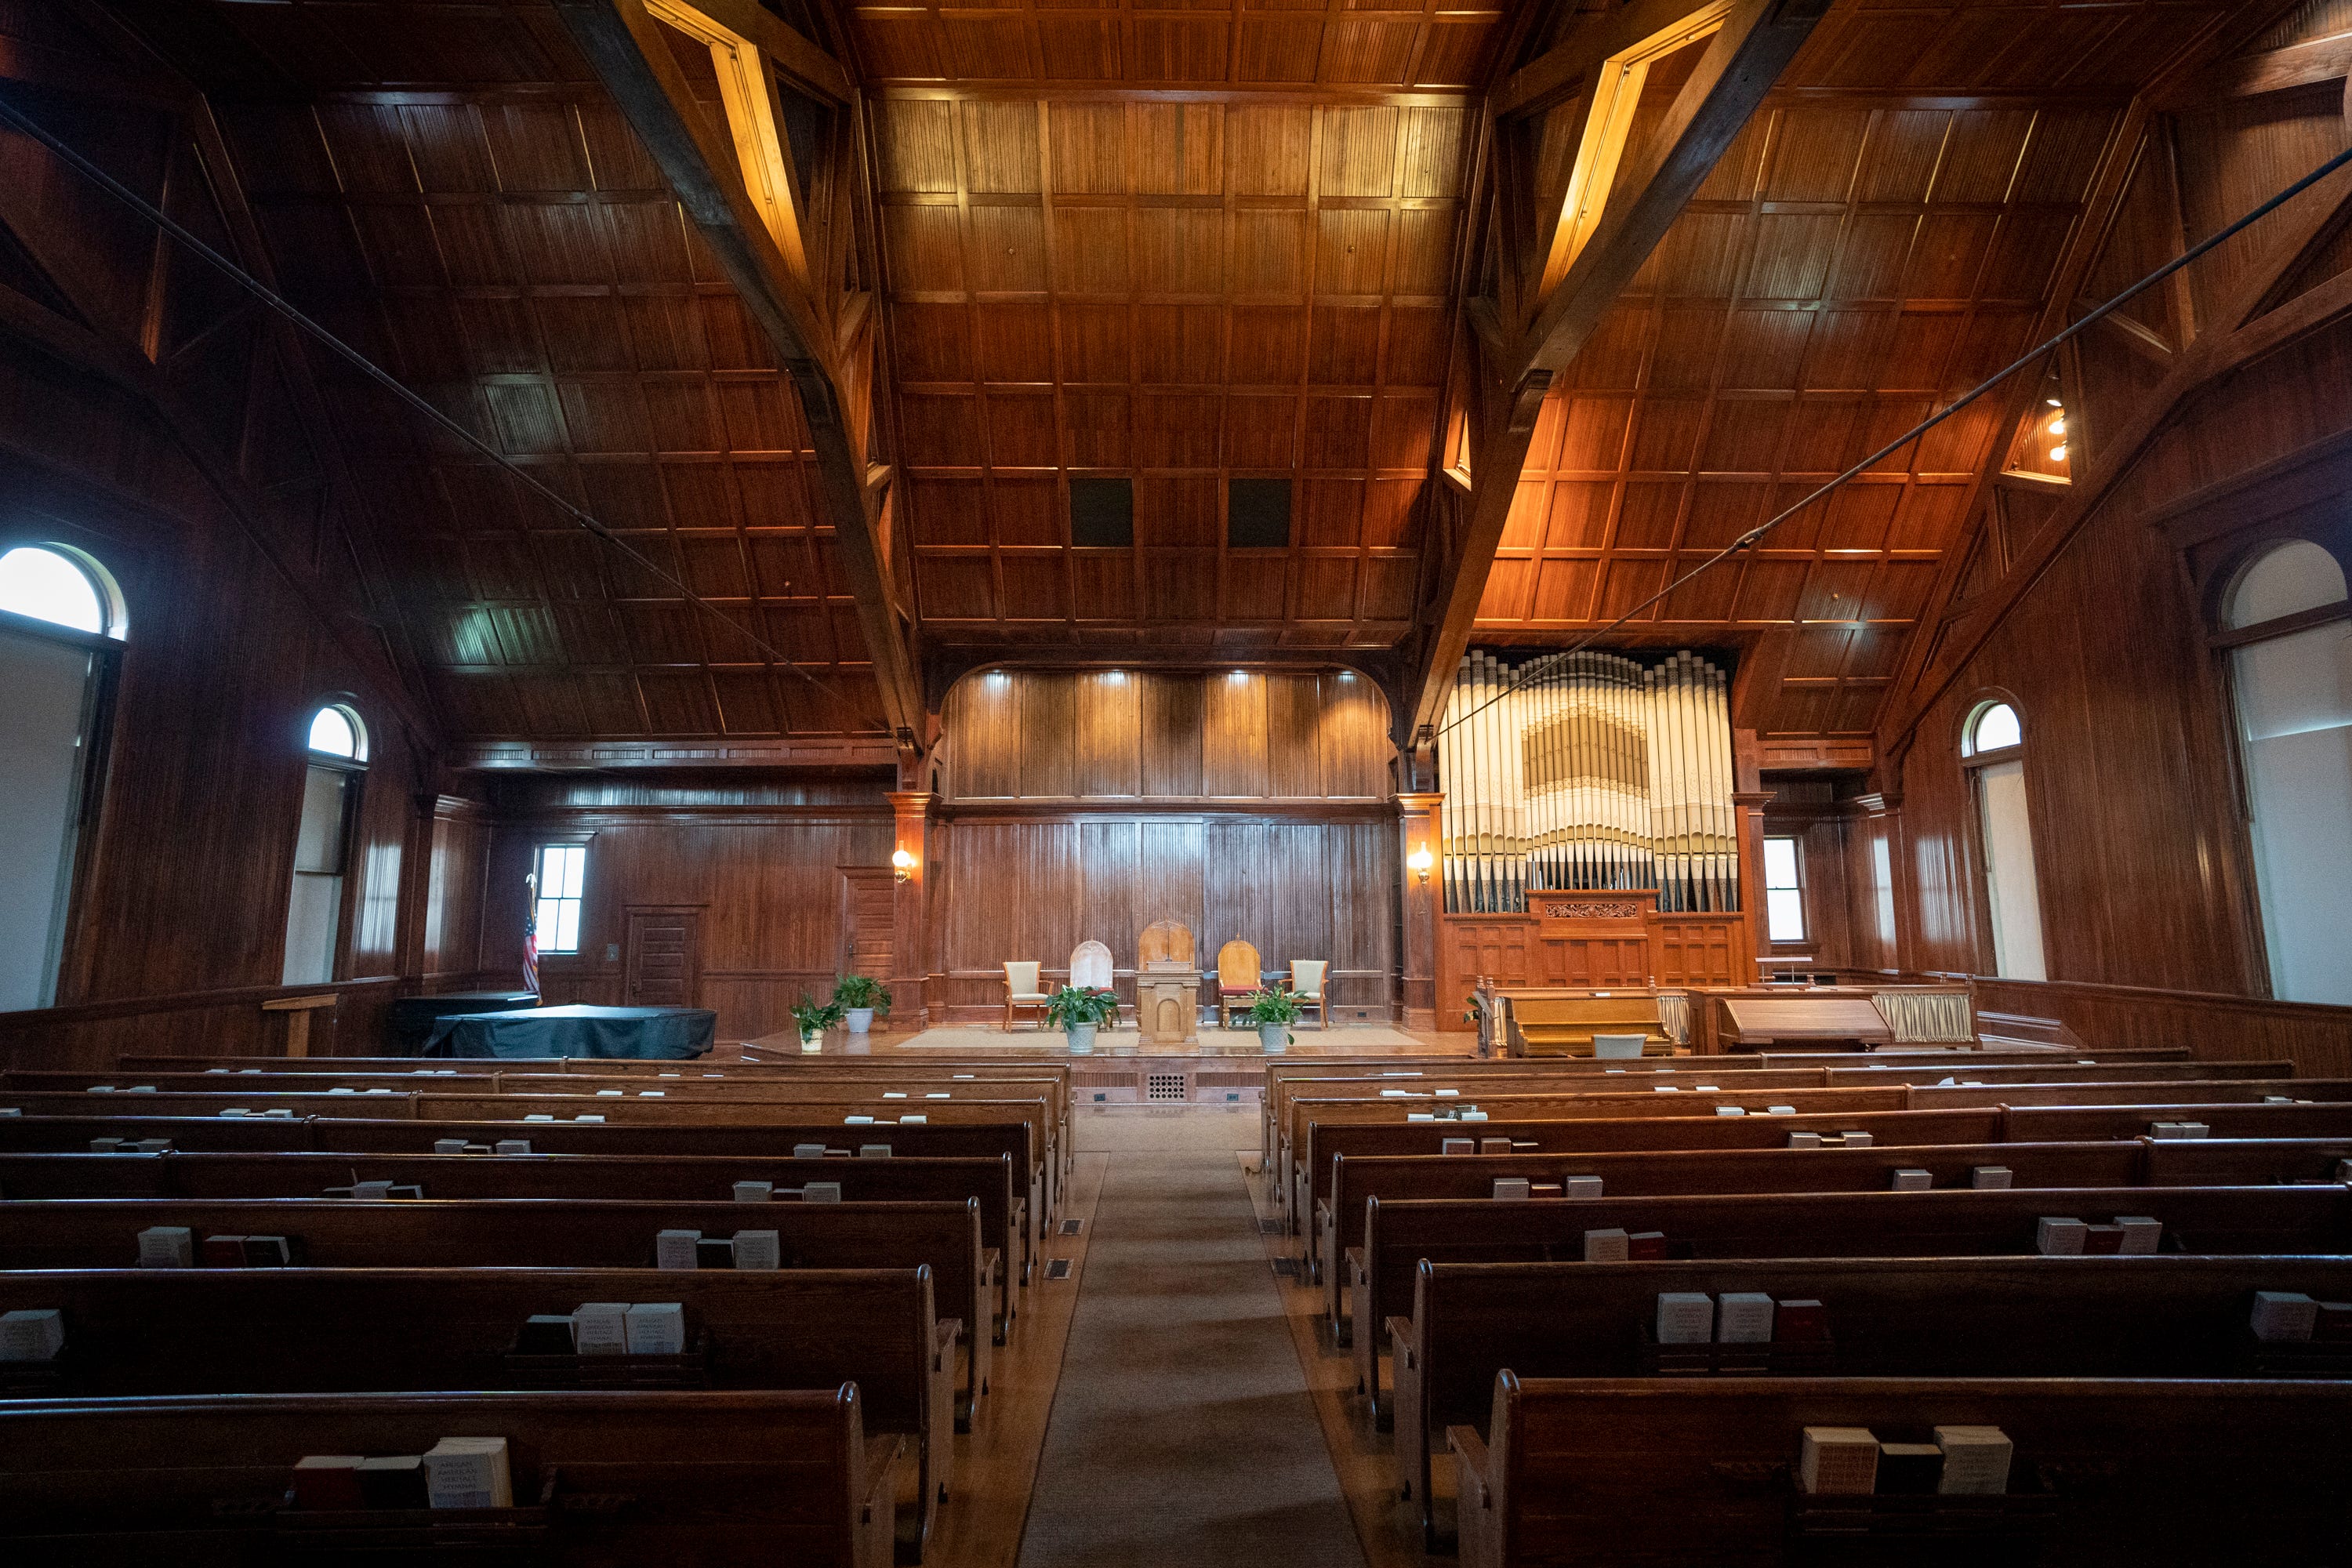 At Woodworth Chapel, Tougaloo College students met to discuss how to achieve Southern desegregation. They inspired students at other Black colleges in Mississippi and other states to hold prayer vigils, boycotts and marches.